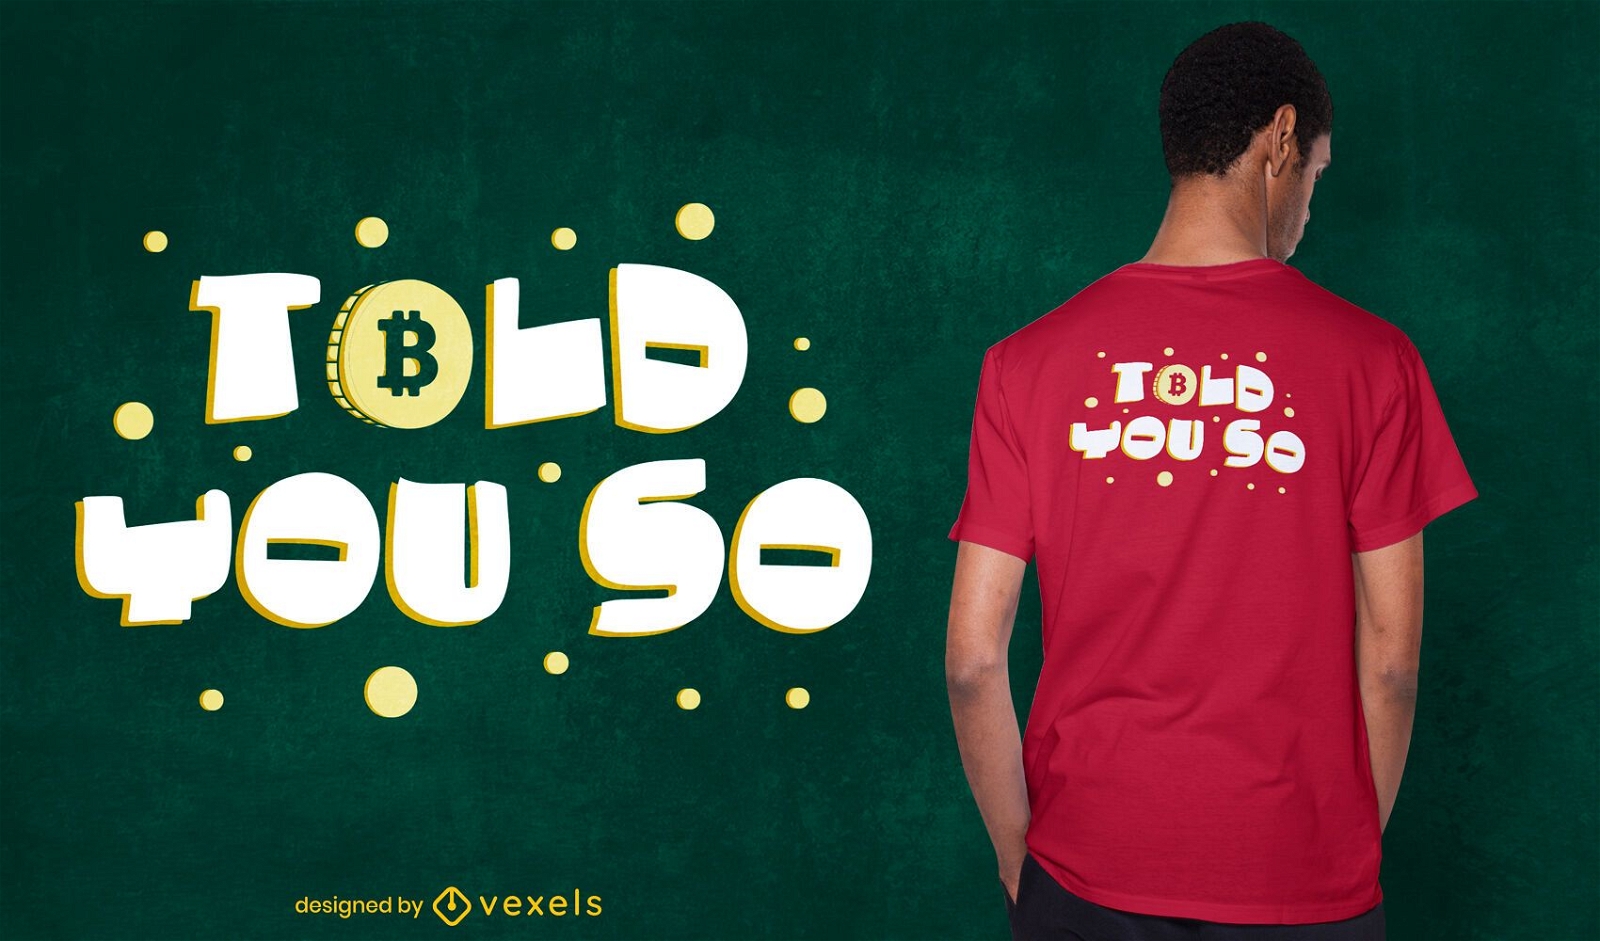 Told you so t-shirt design